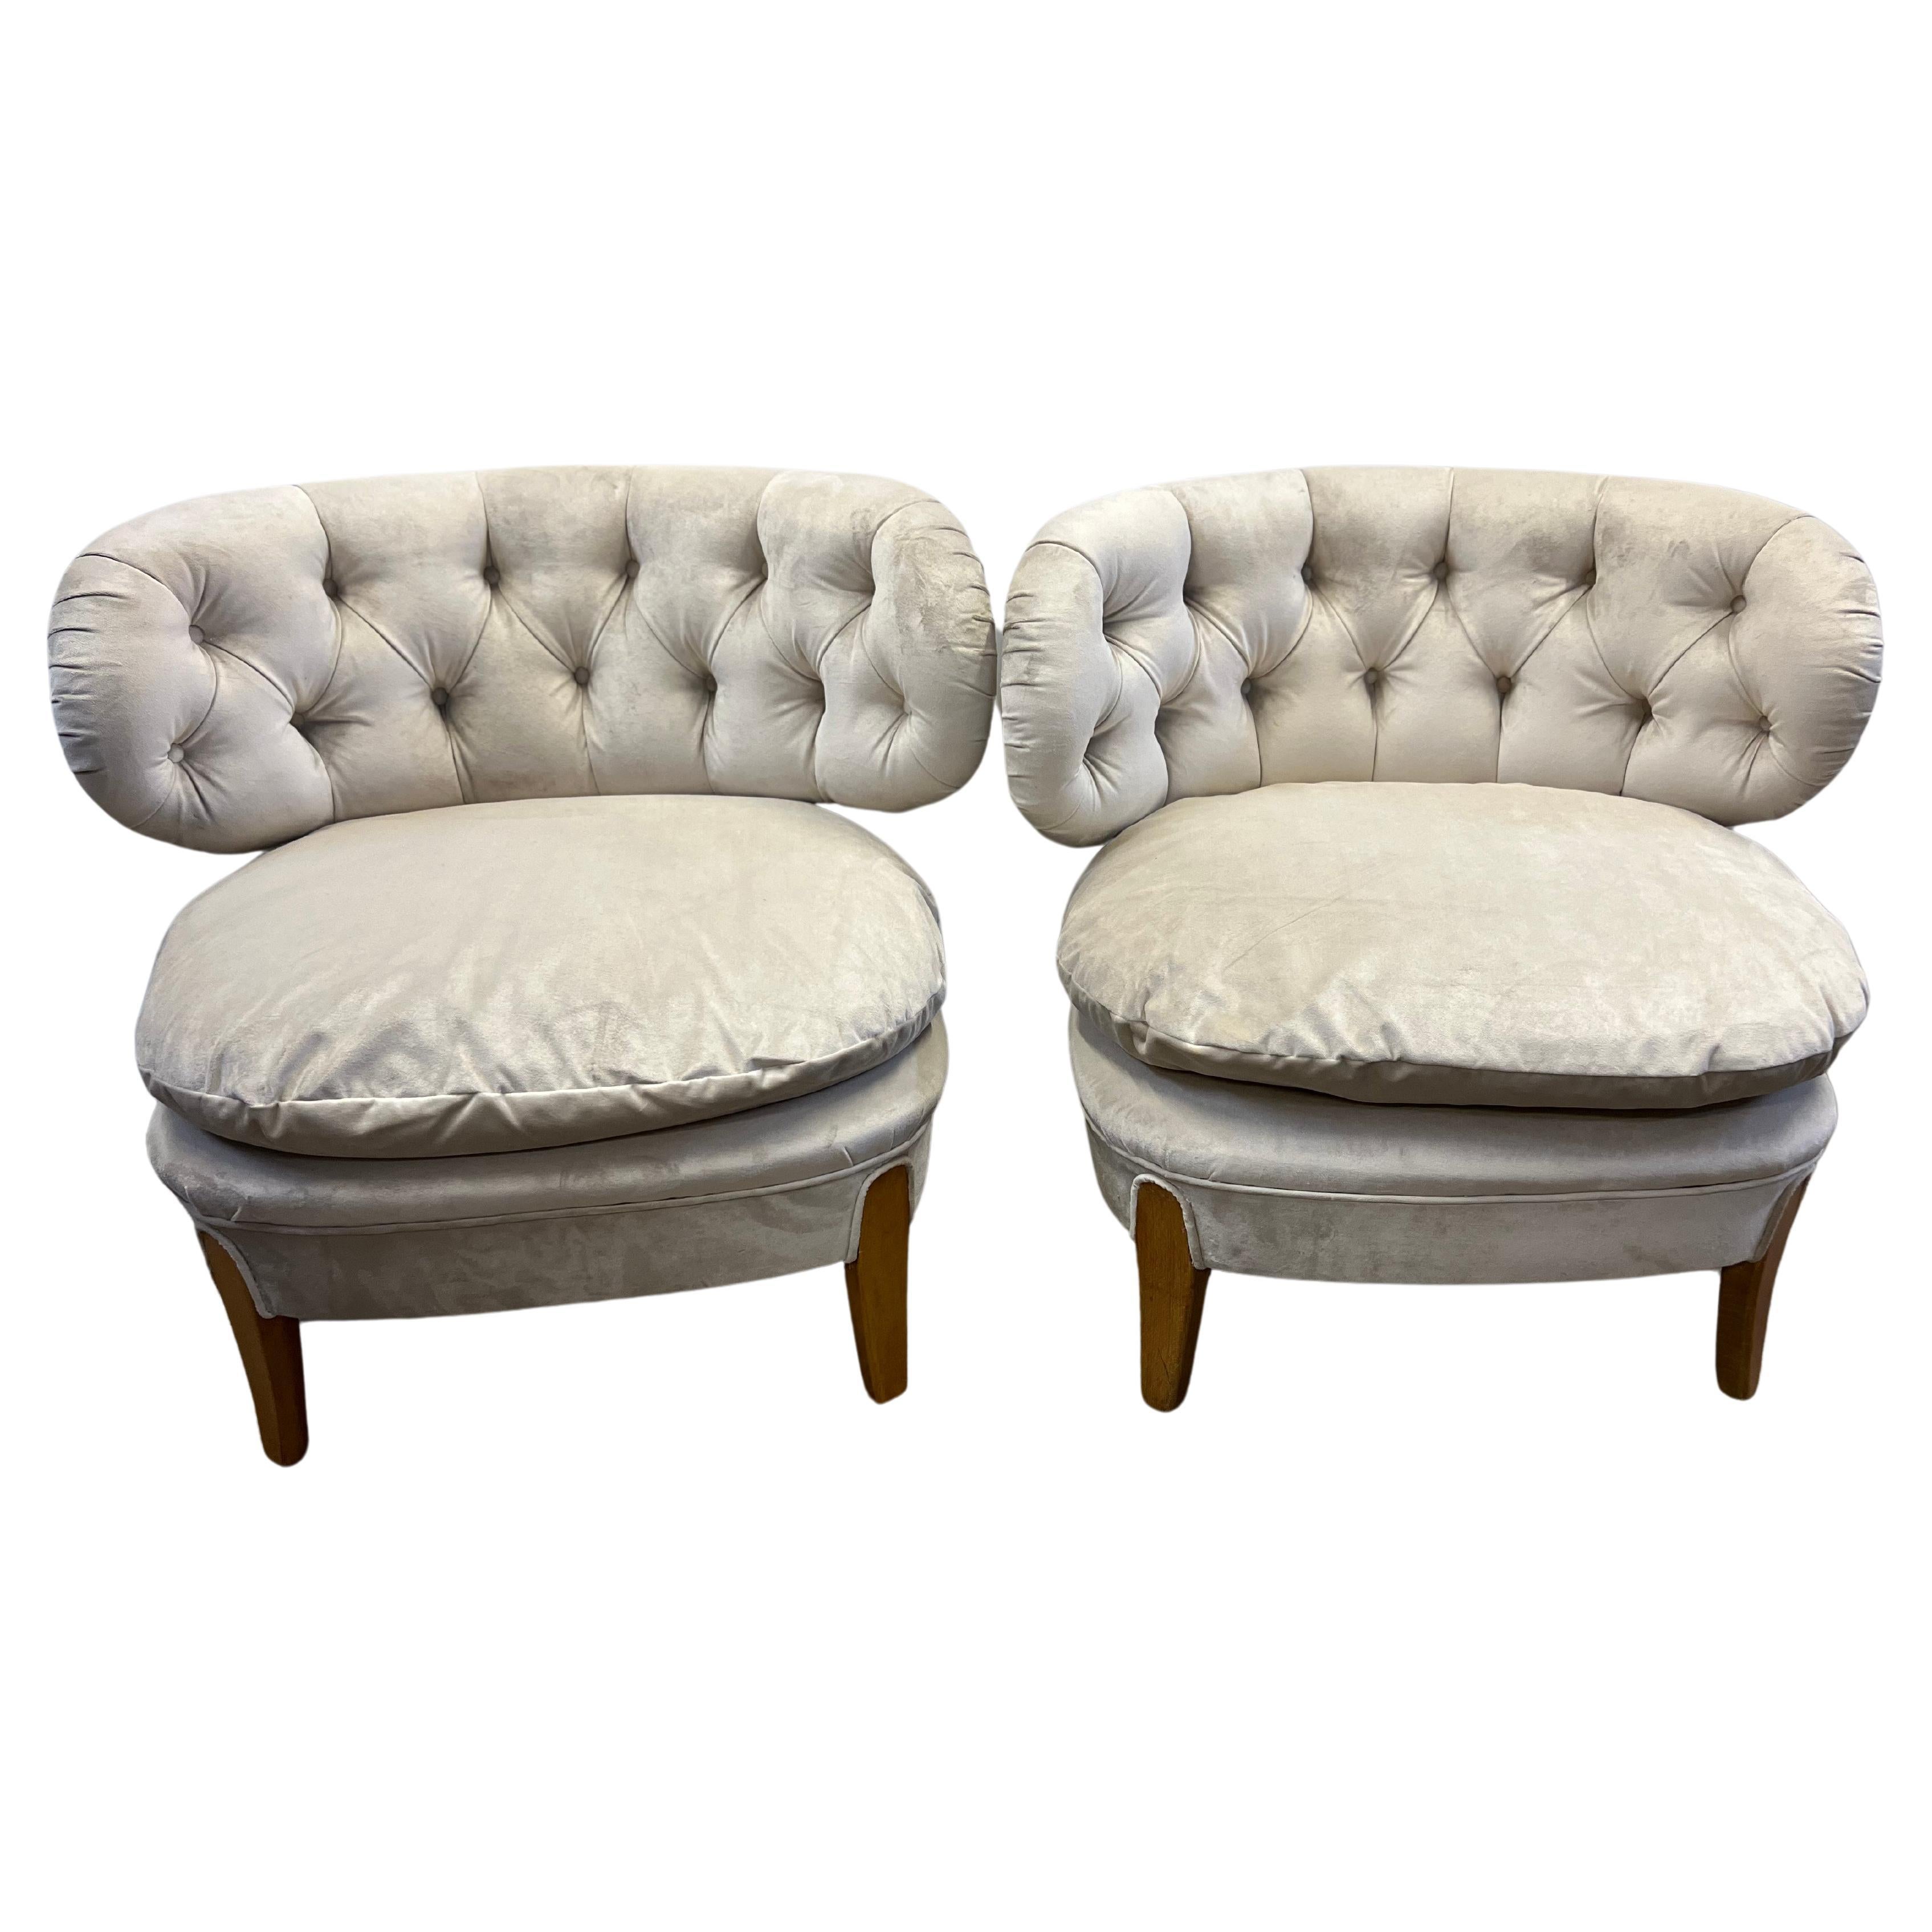 Swedish Pair of Otto Schultz Newly Upholstered Velvet Chairs, circa 1940s For Sale